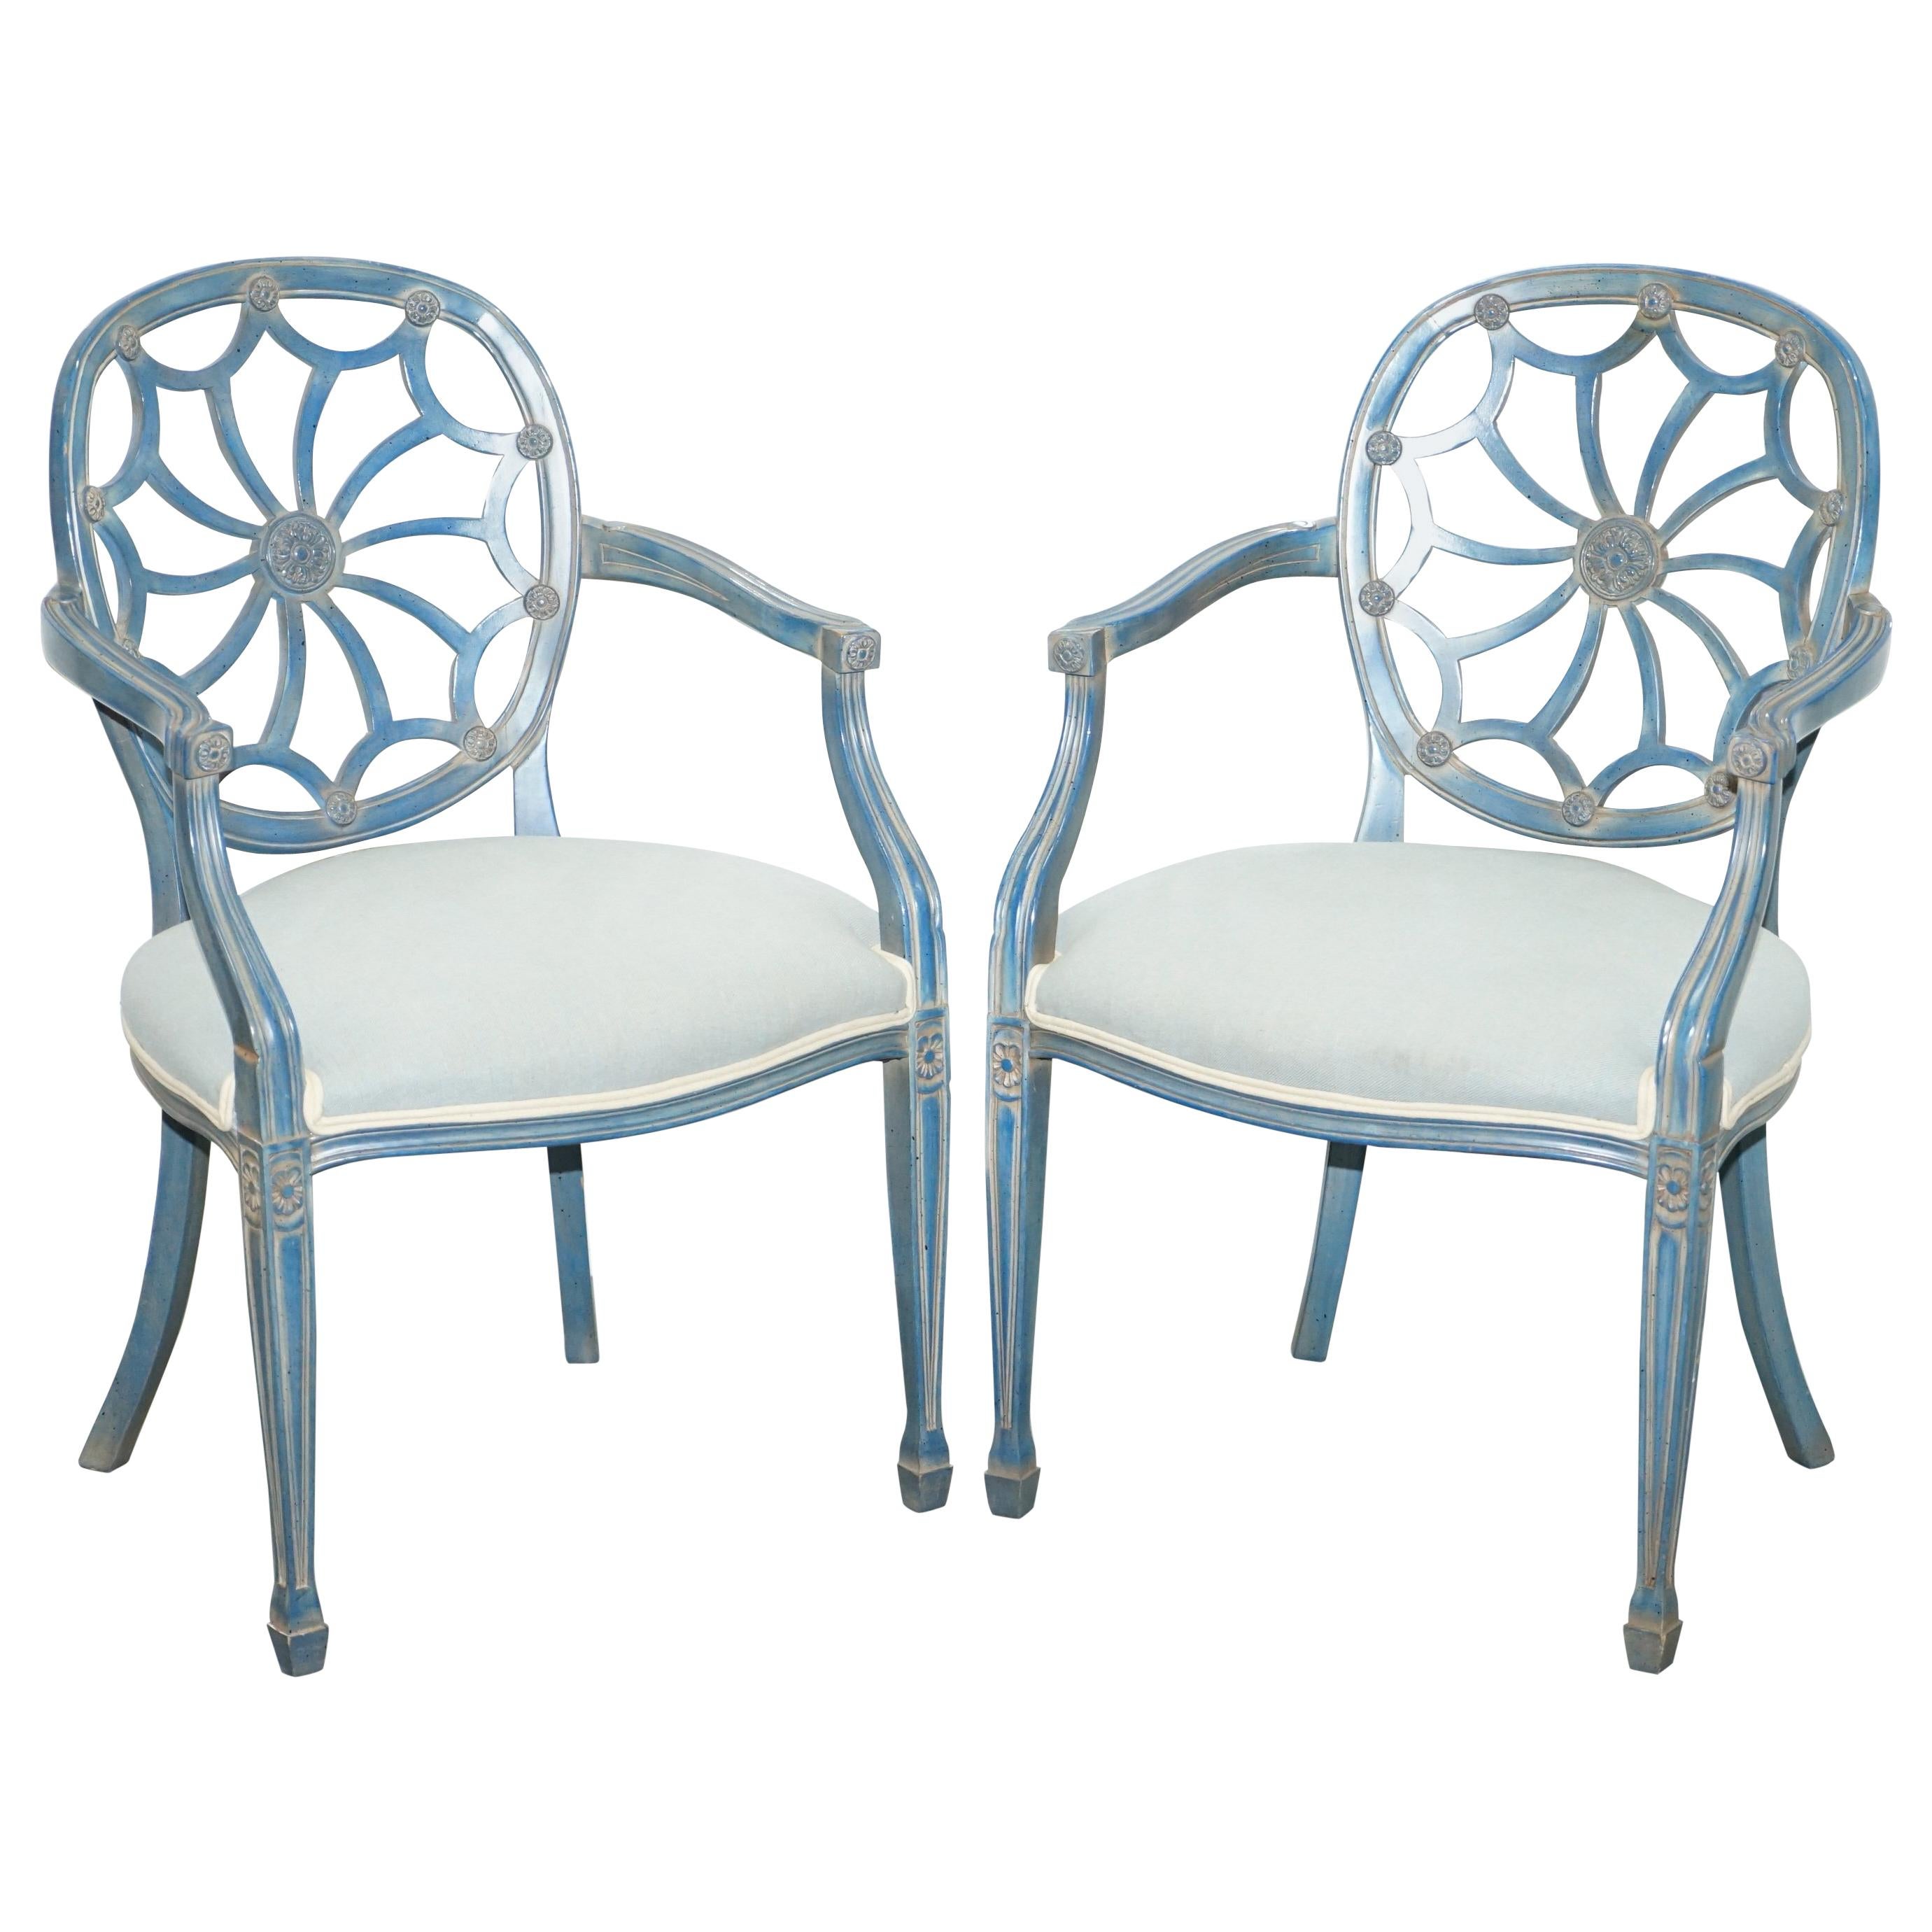 Pair of Stunning George Hepplewhite Spider Web Back Occasional Chairs Armchairs